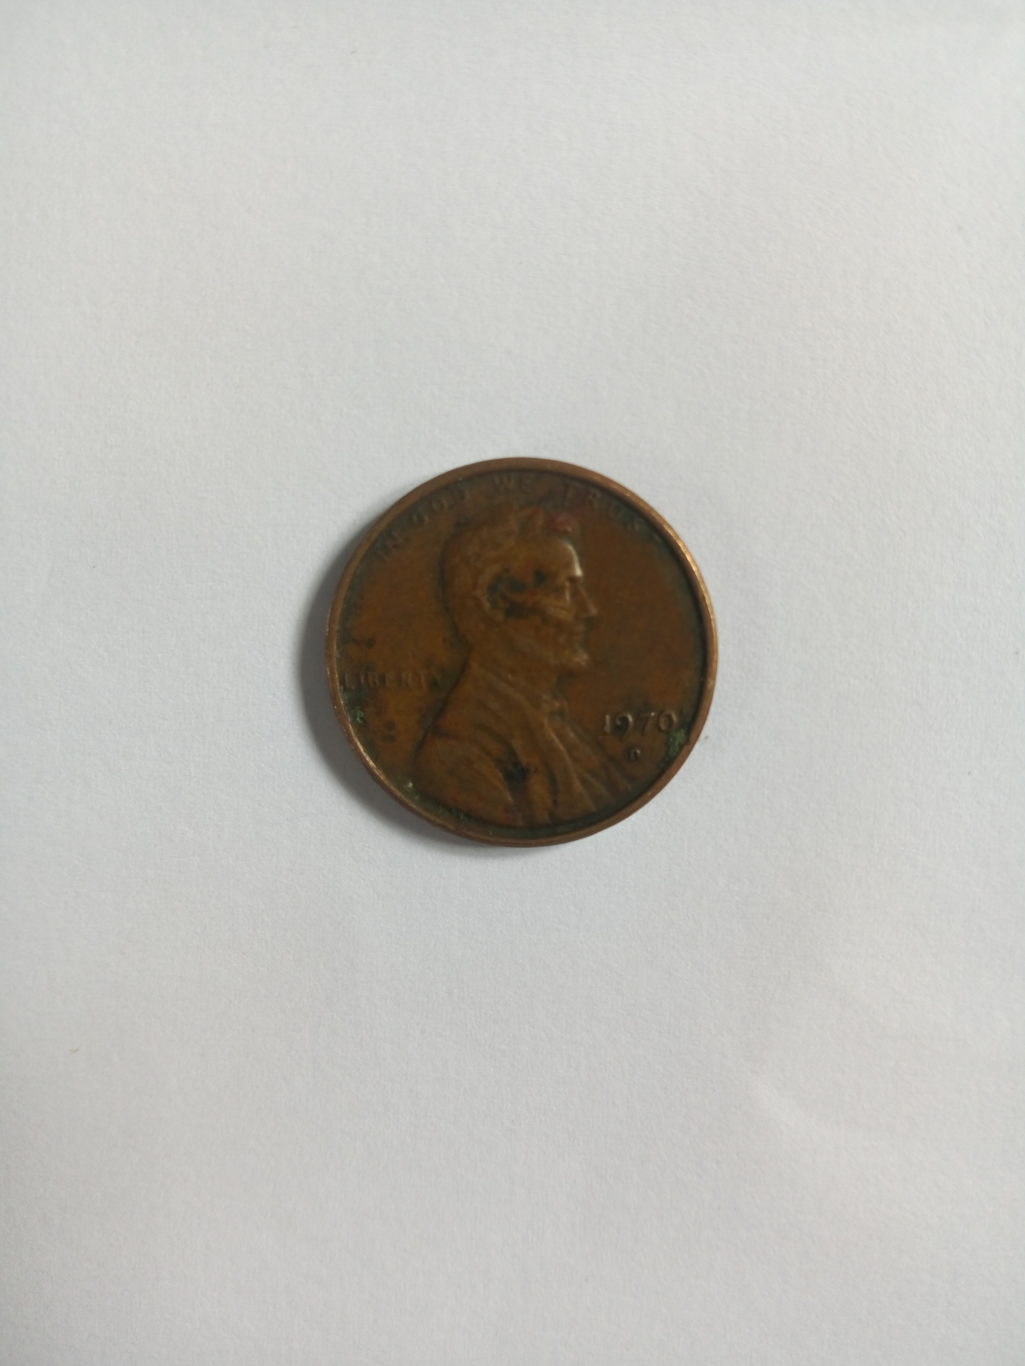 1970_liberty united states of america one cent